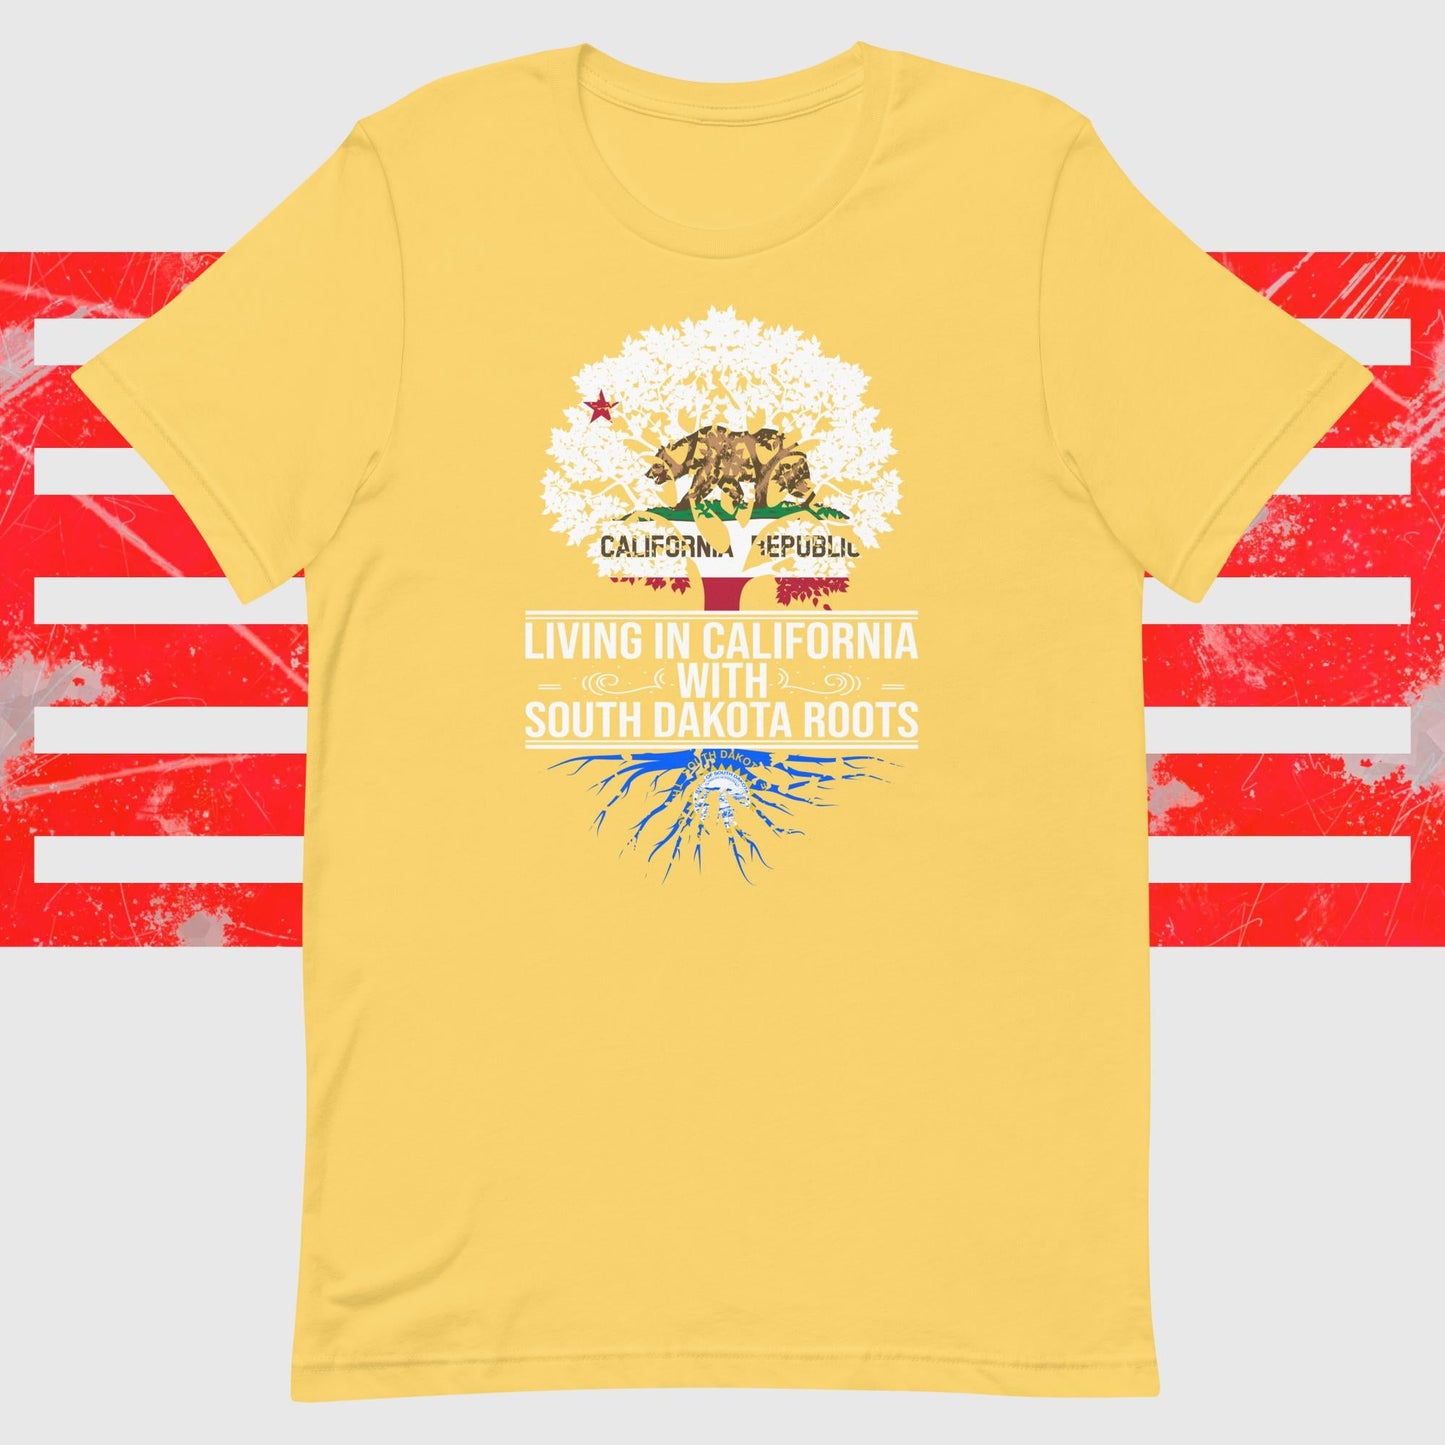 Living In California With South Dakota Roots - The Dude Abides - T-shirt - california - clever - design